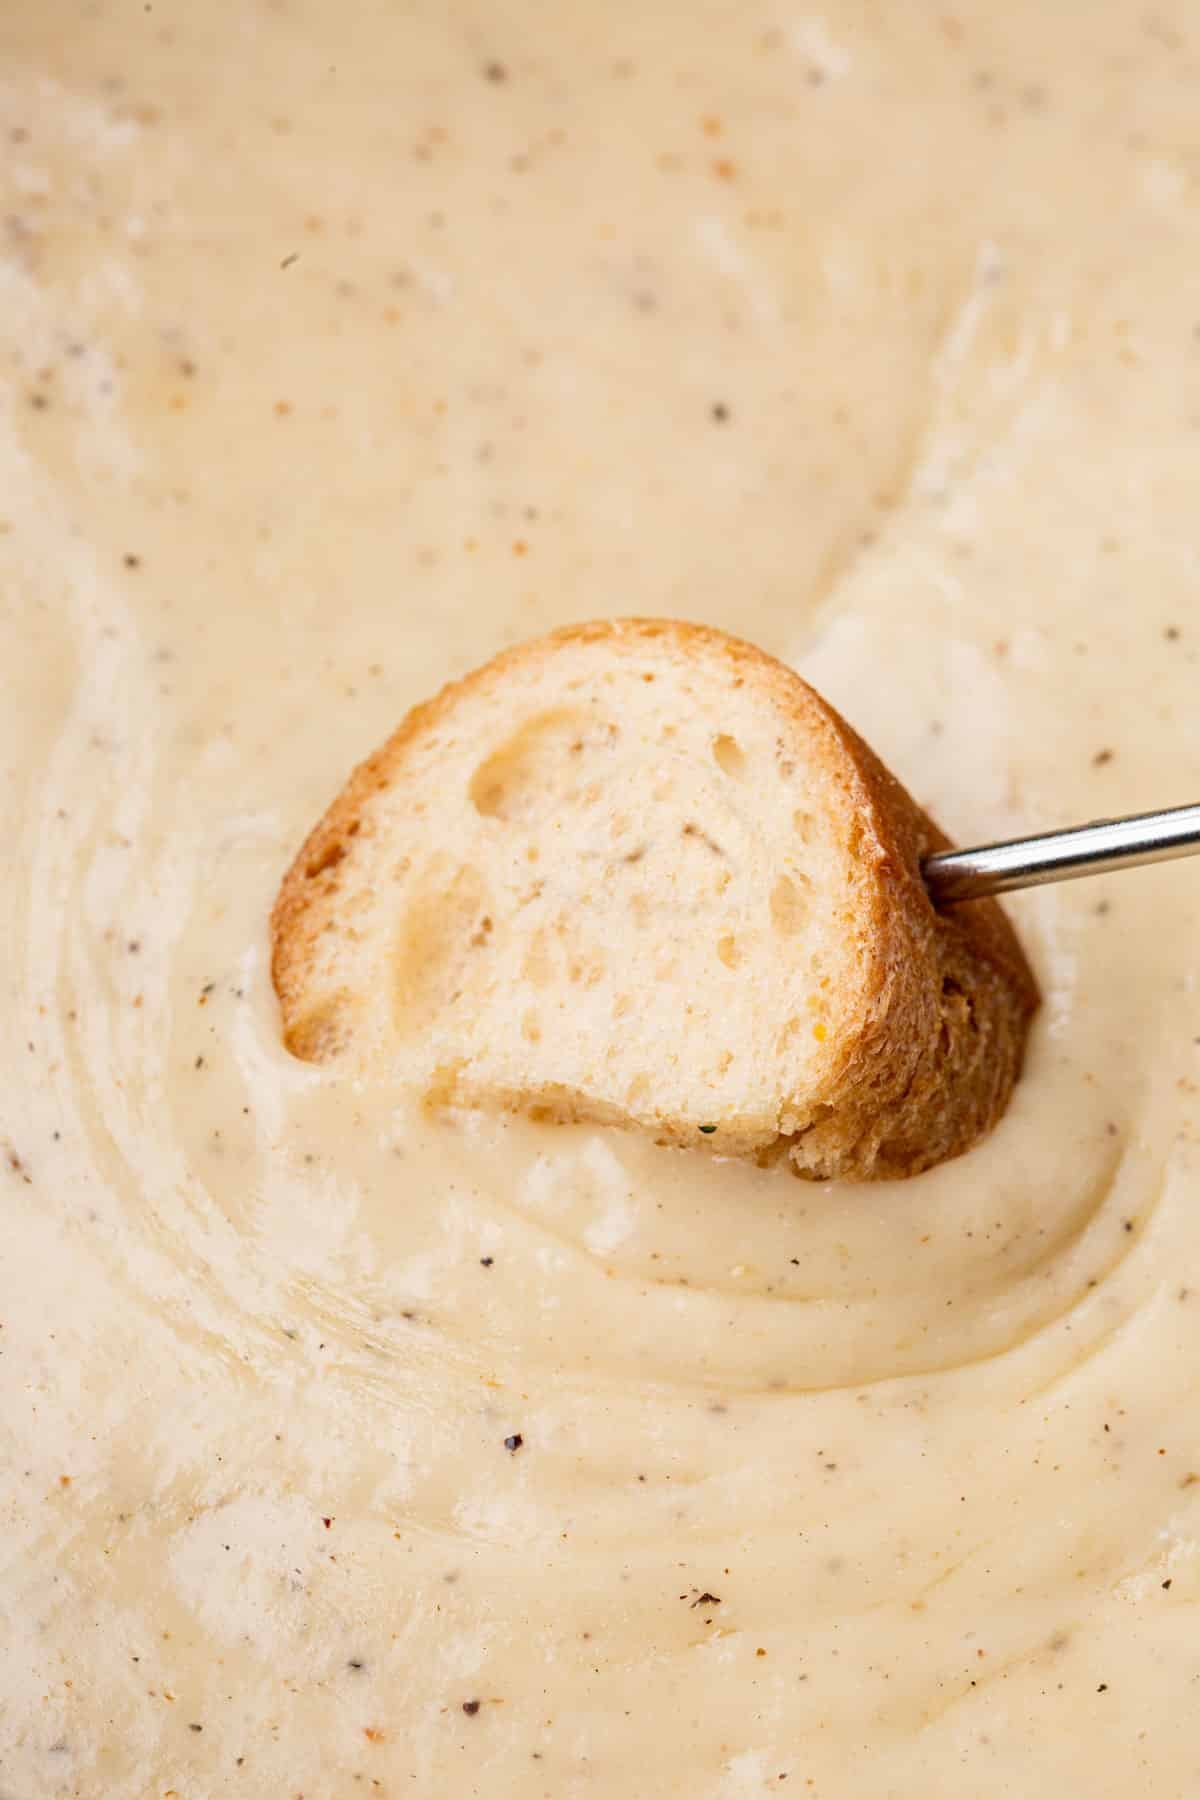 A skewered piece of gluten-free bread dipped into gluten-free cheese fondue.